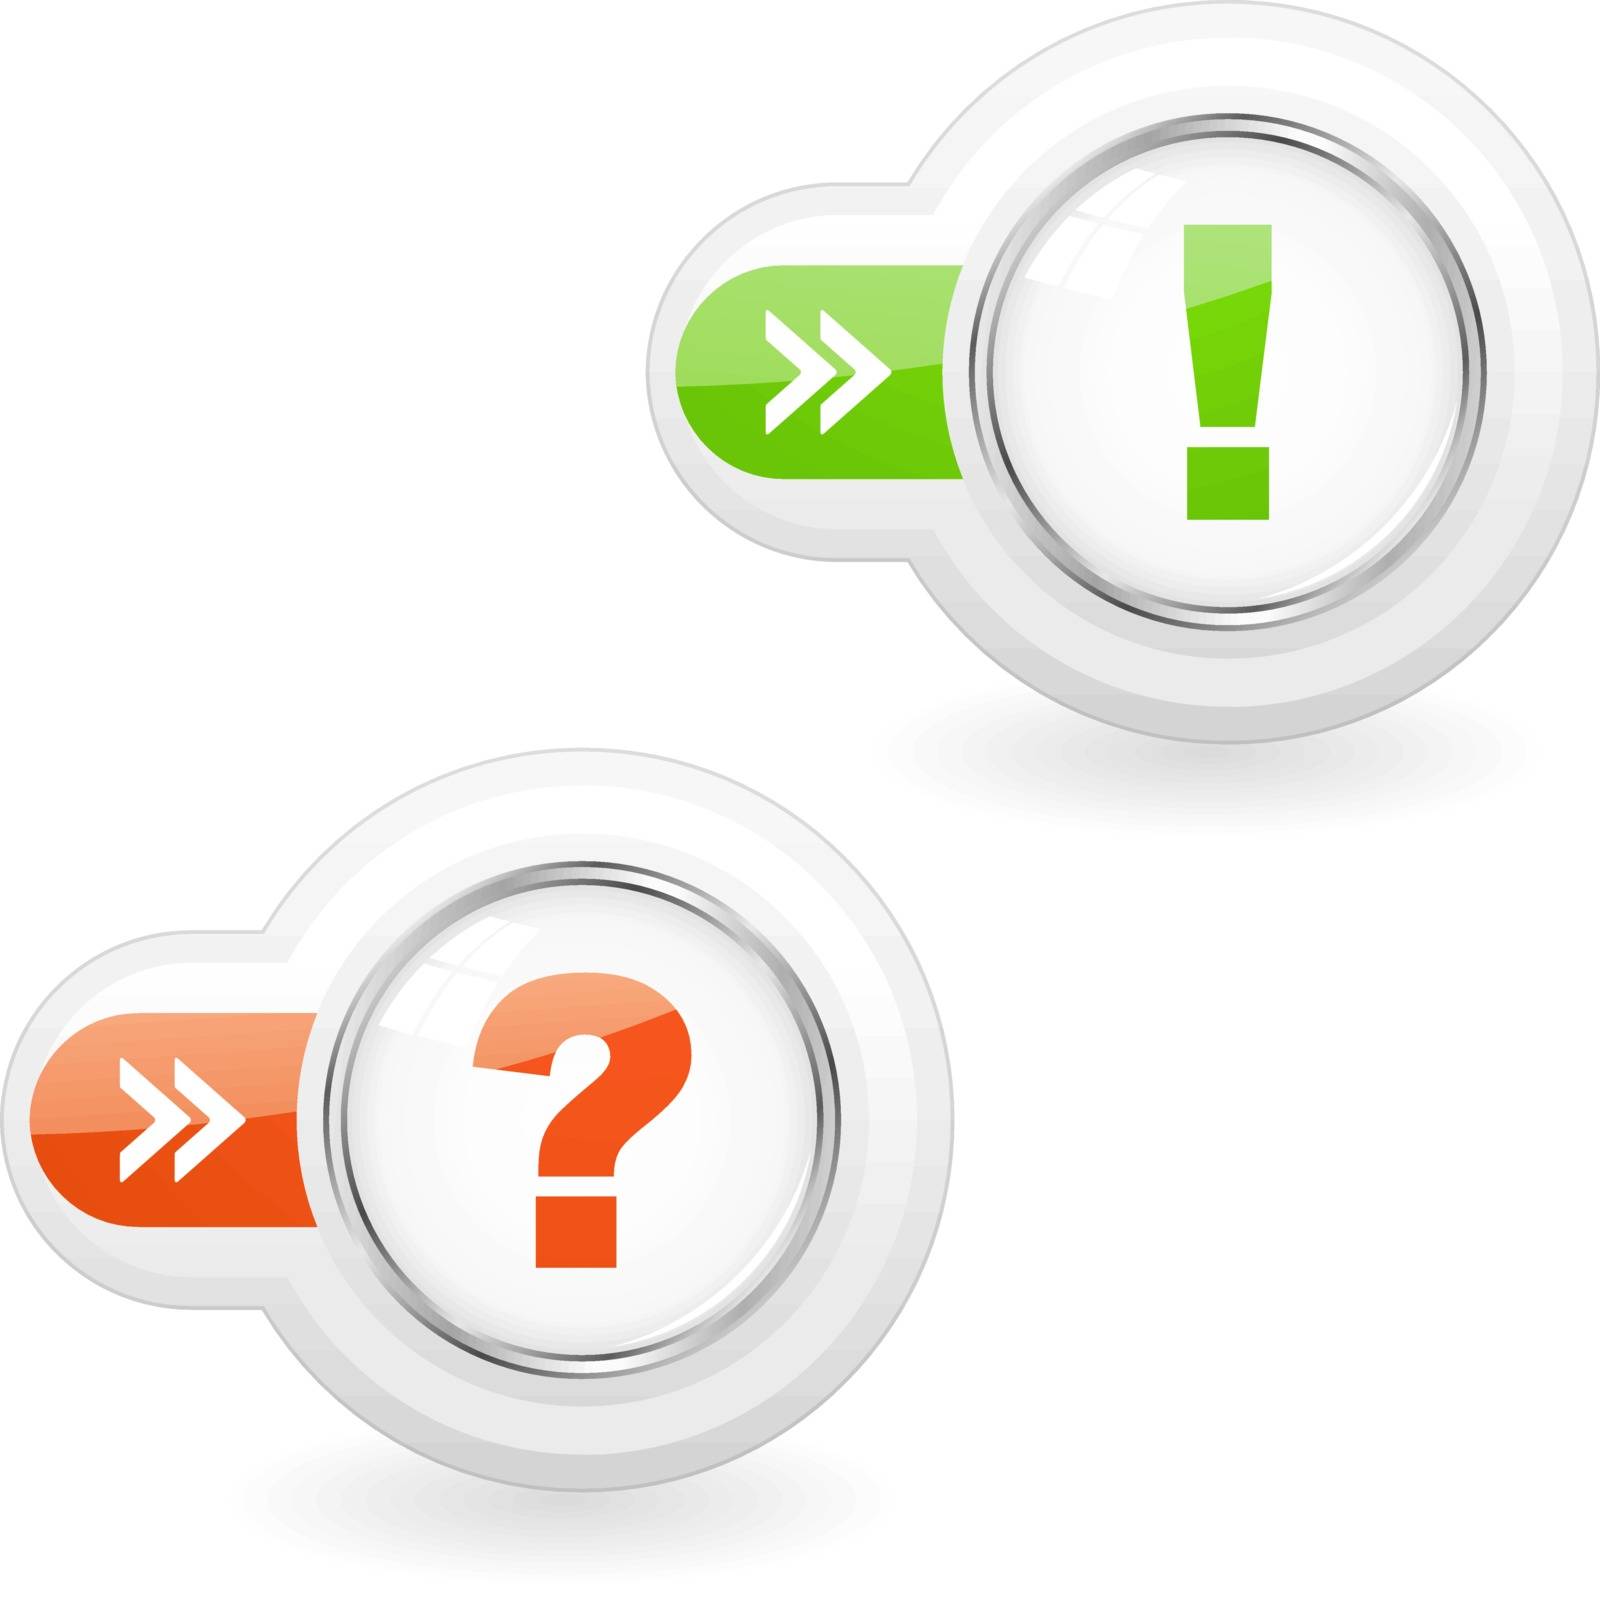 Exclamation and question icon set. Usable for web design.